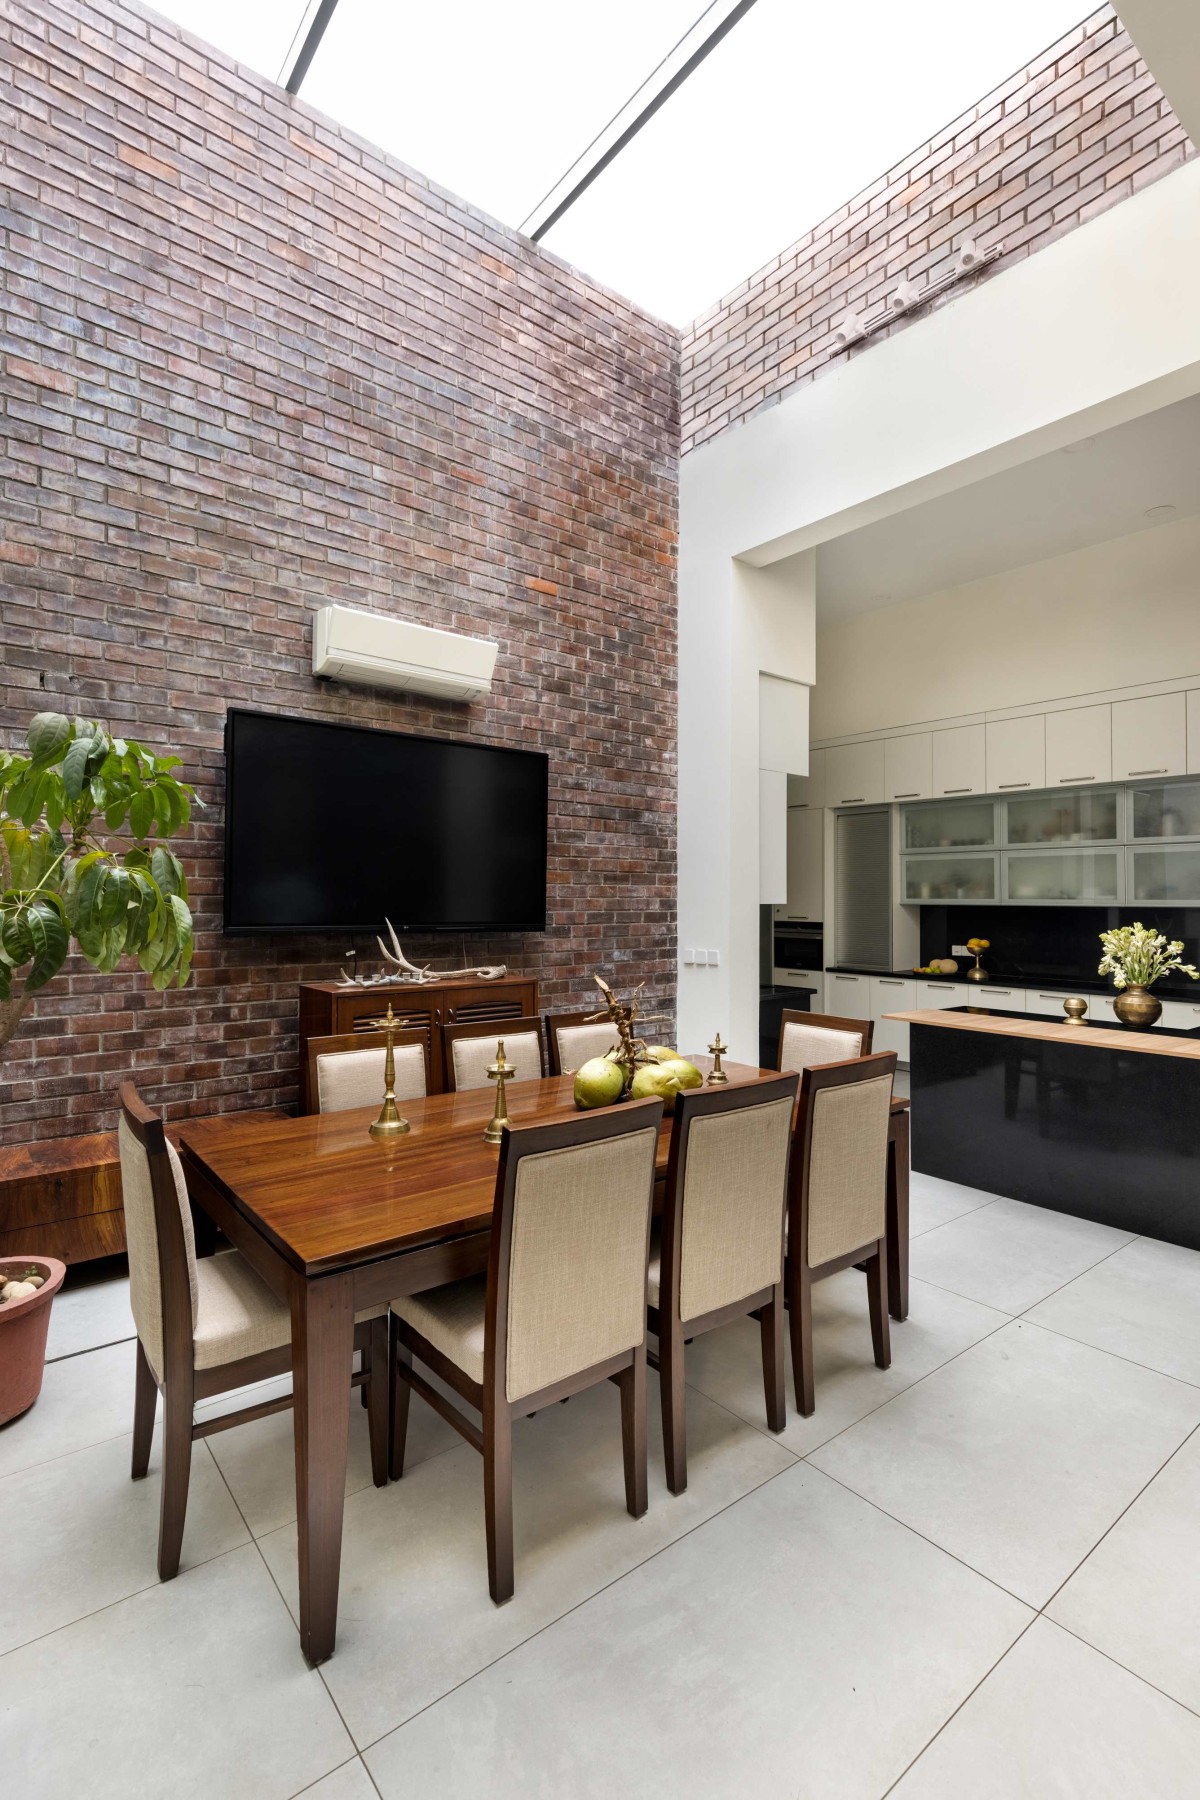 Kitchen and Dining Area of The Brick House by Studio Ardete